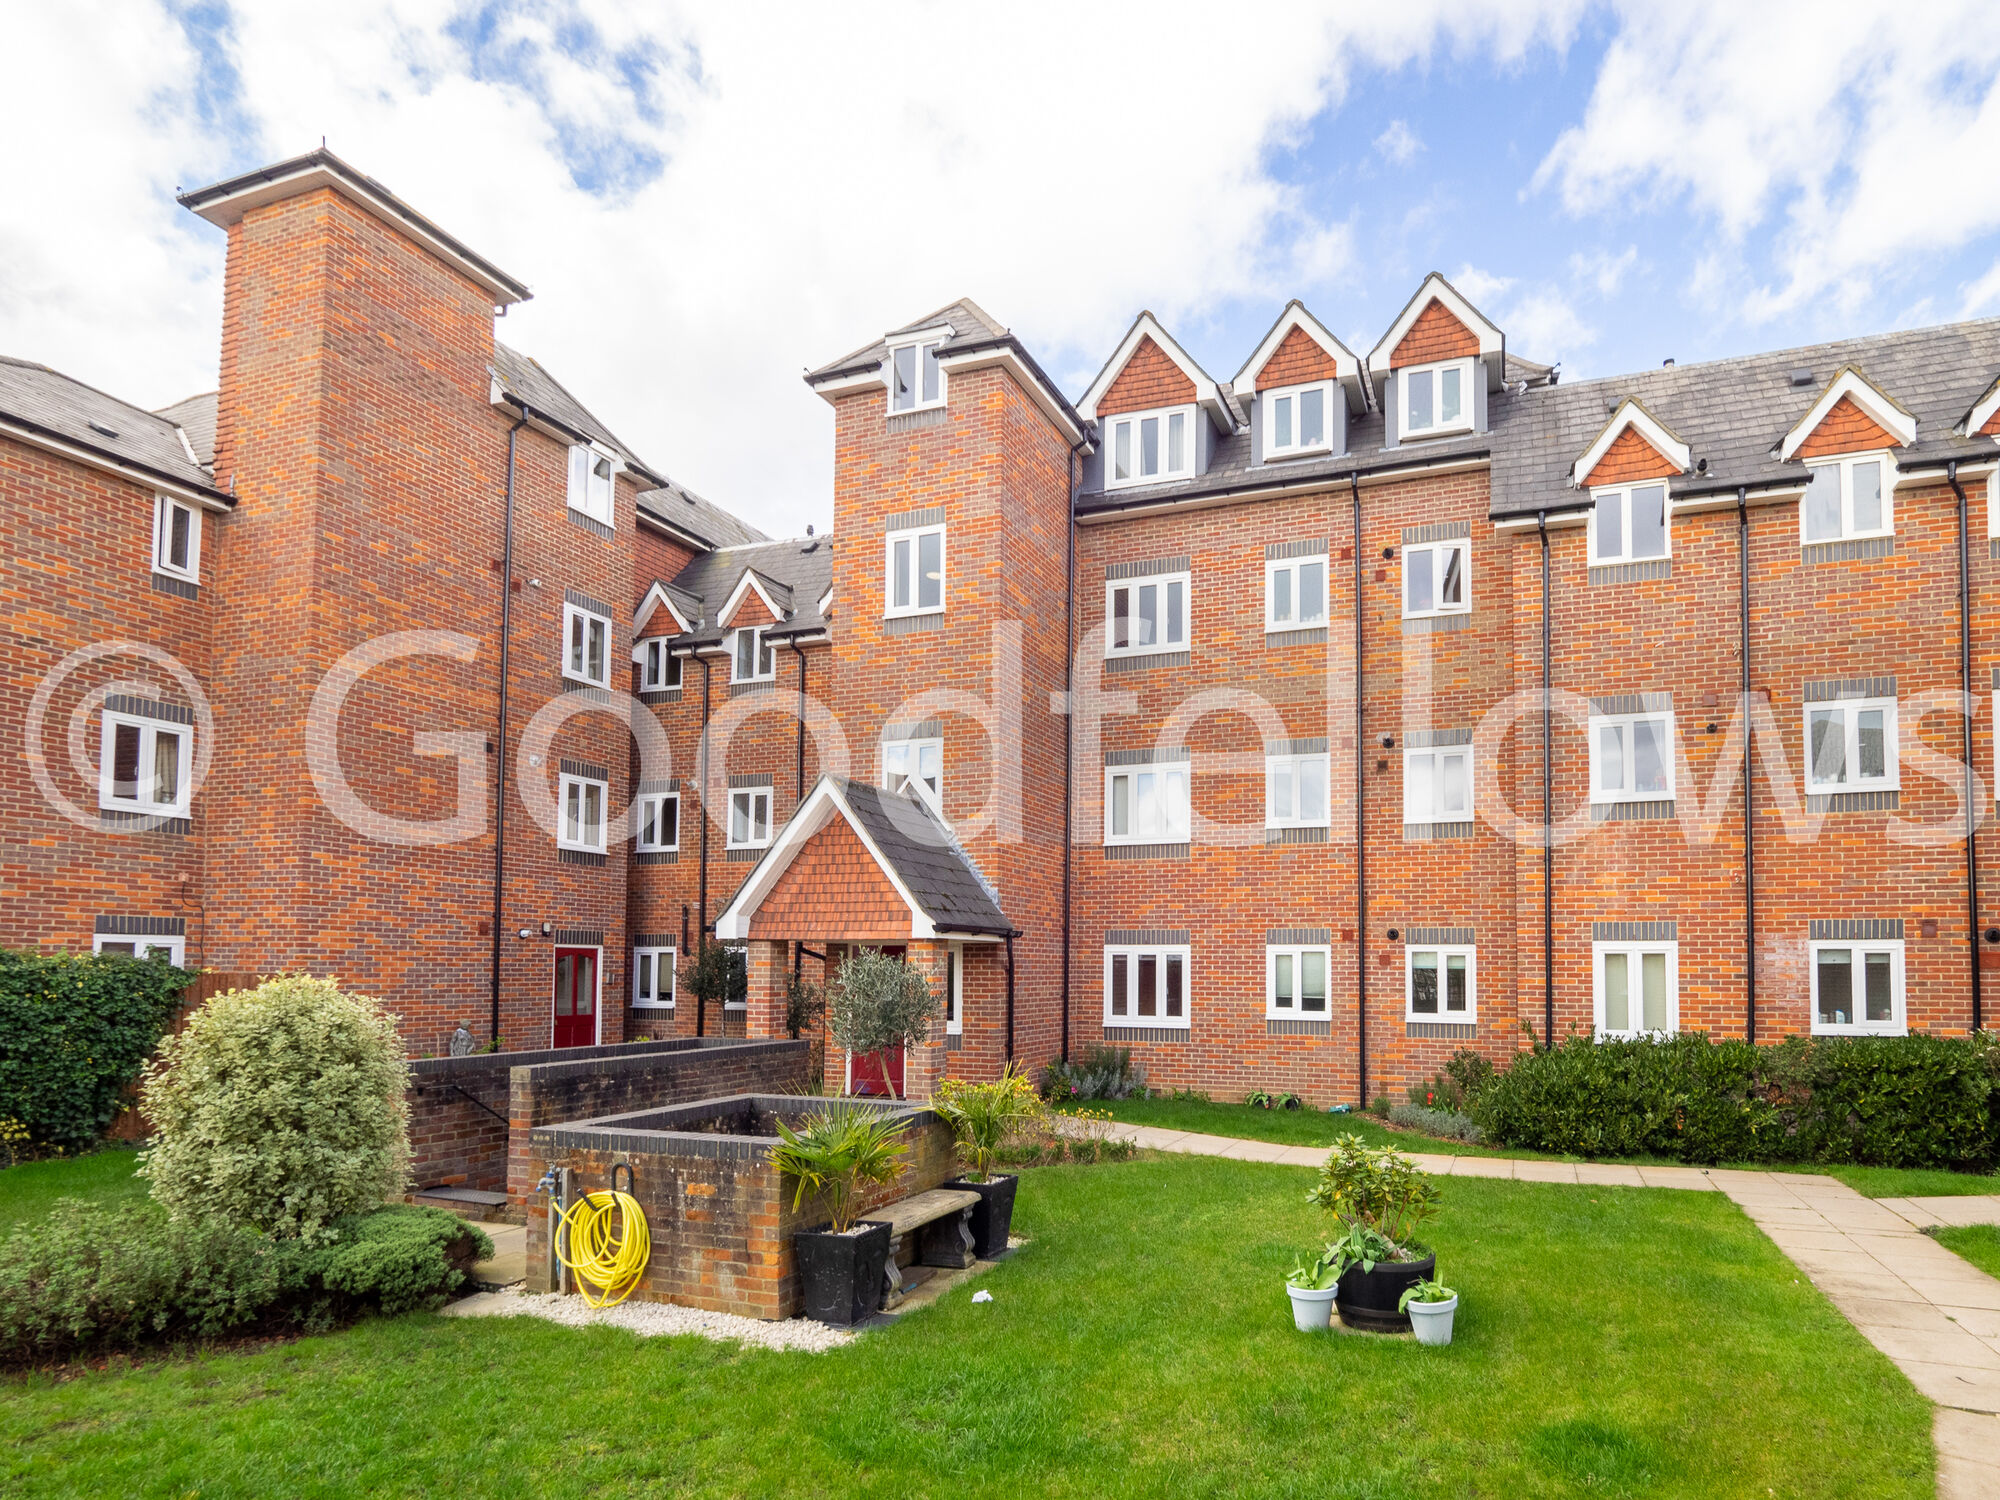 2 bedroom  flat to rent, Available now Sir Cyril Black Way, London, SW19, main image